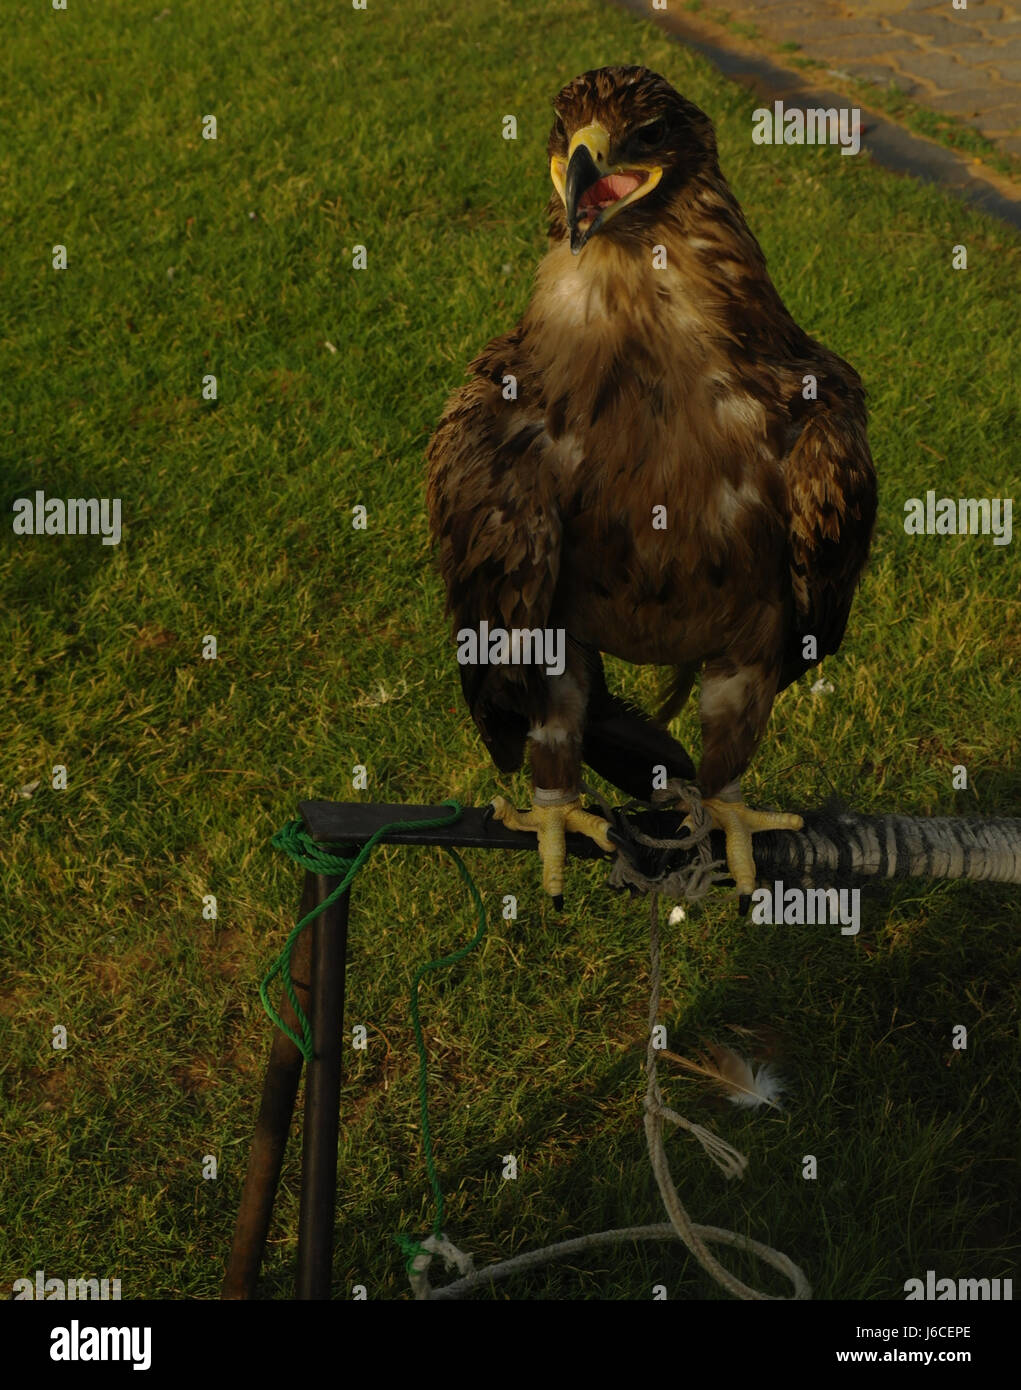 Common Buzzard, looking forward with open mouth, standing and tethered metal stand on grass, Al Badayer, Dubai-Hatta Road, Dubai, United Arab Emirates Stock Photo